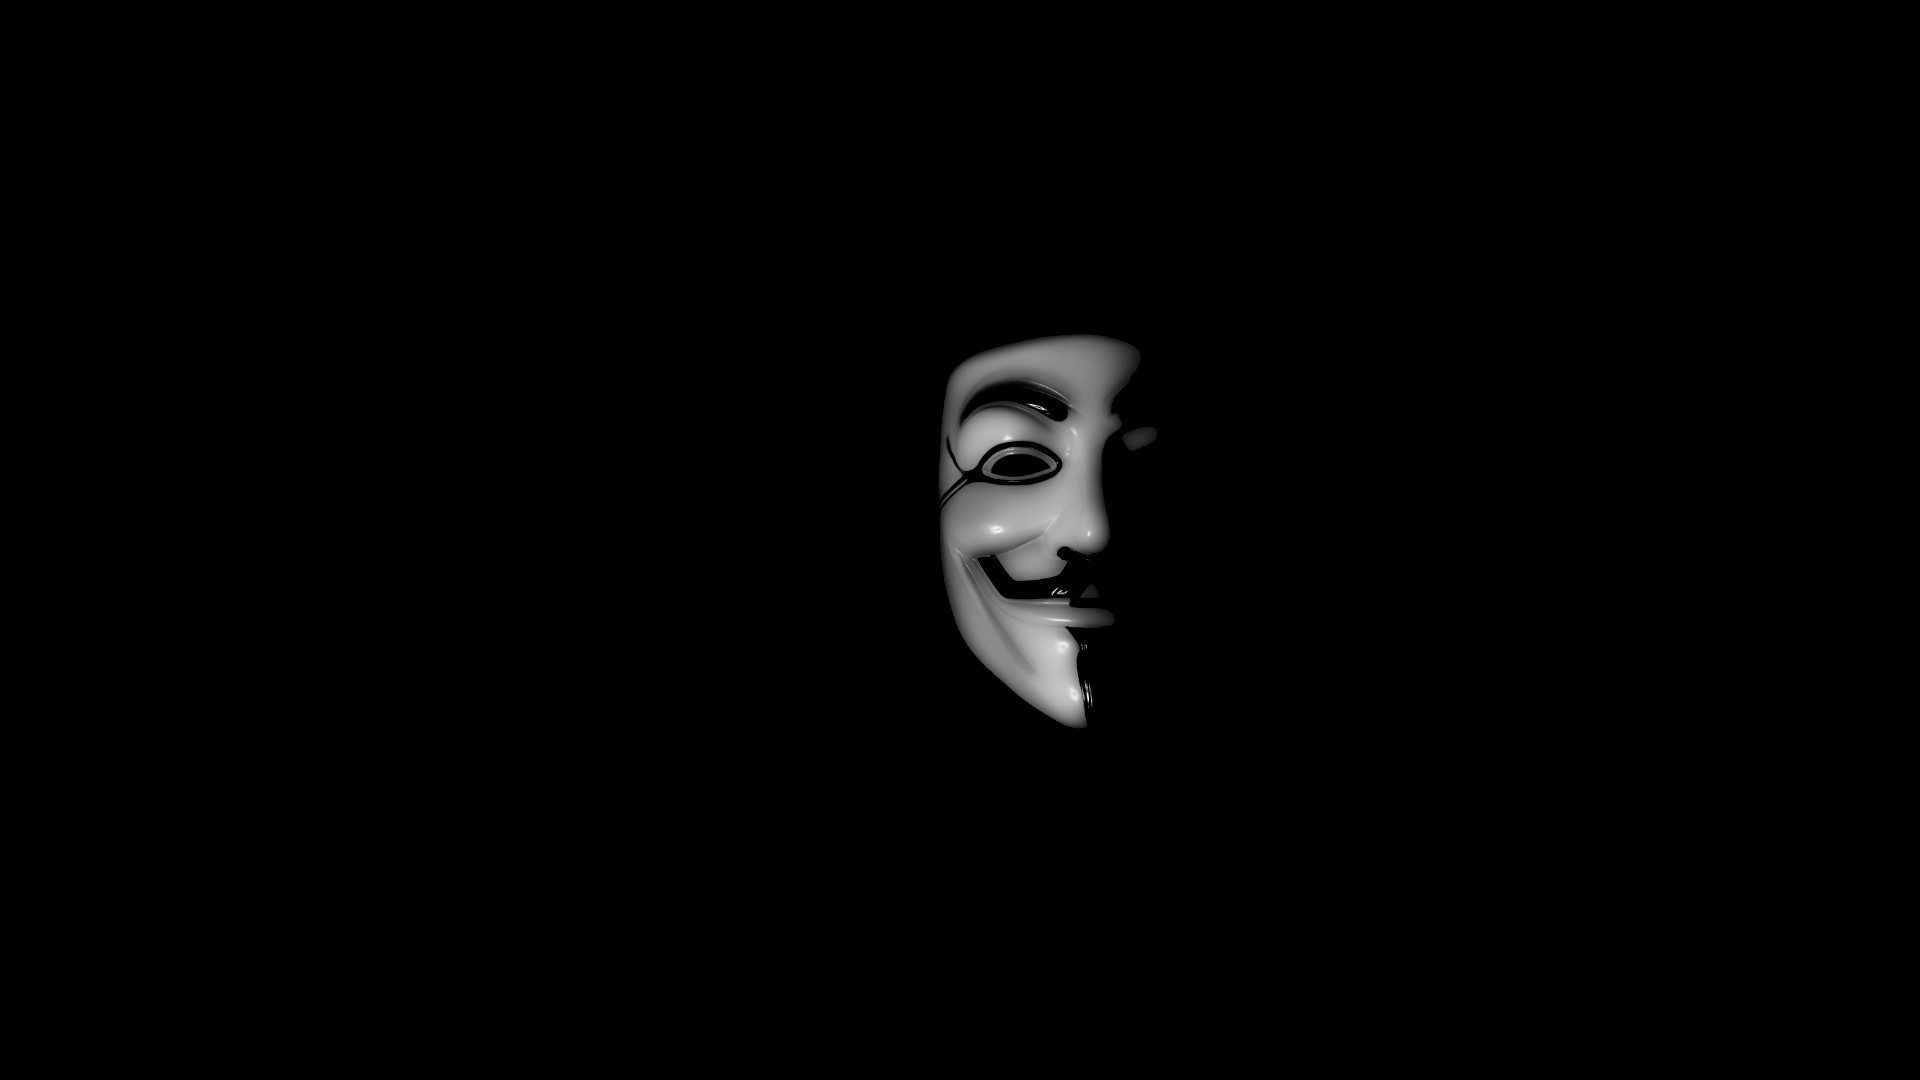 Photos anonymous wallpaper full hd page 7 1920x1080